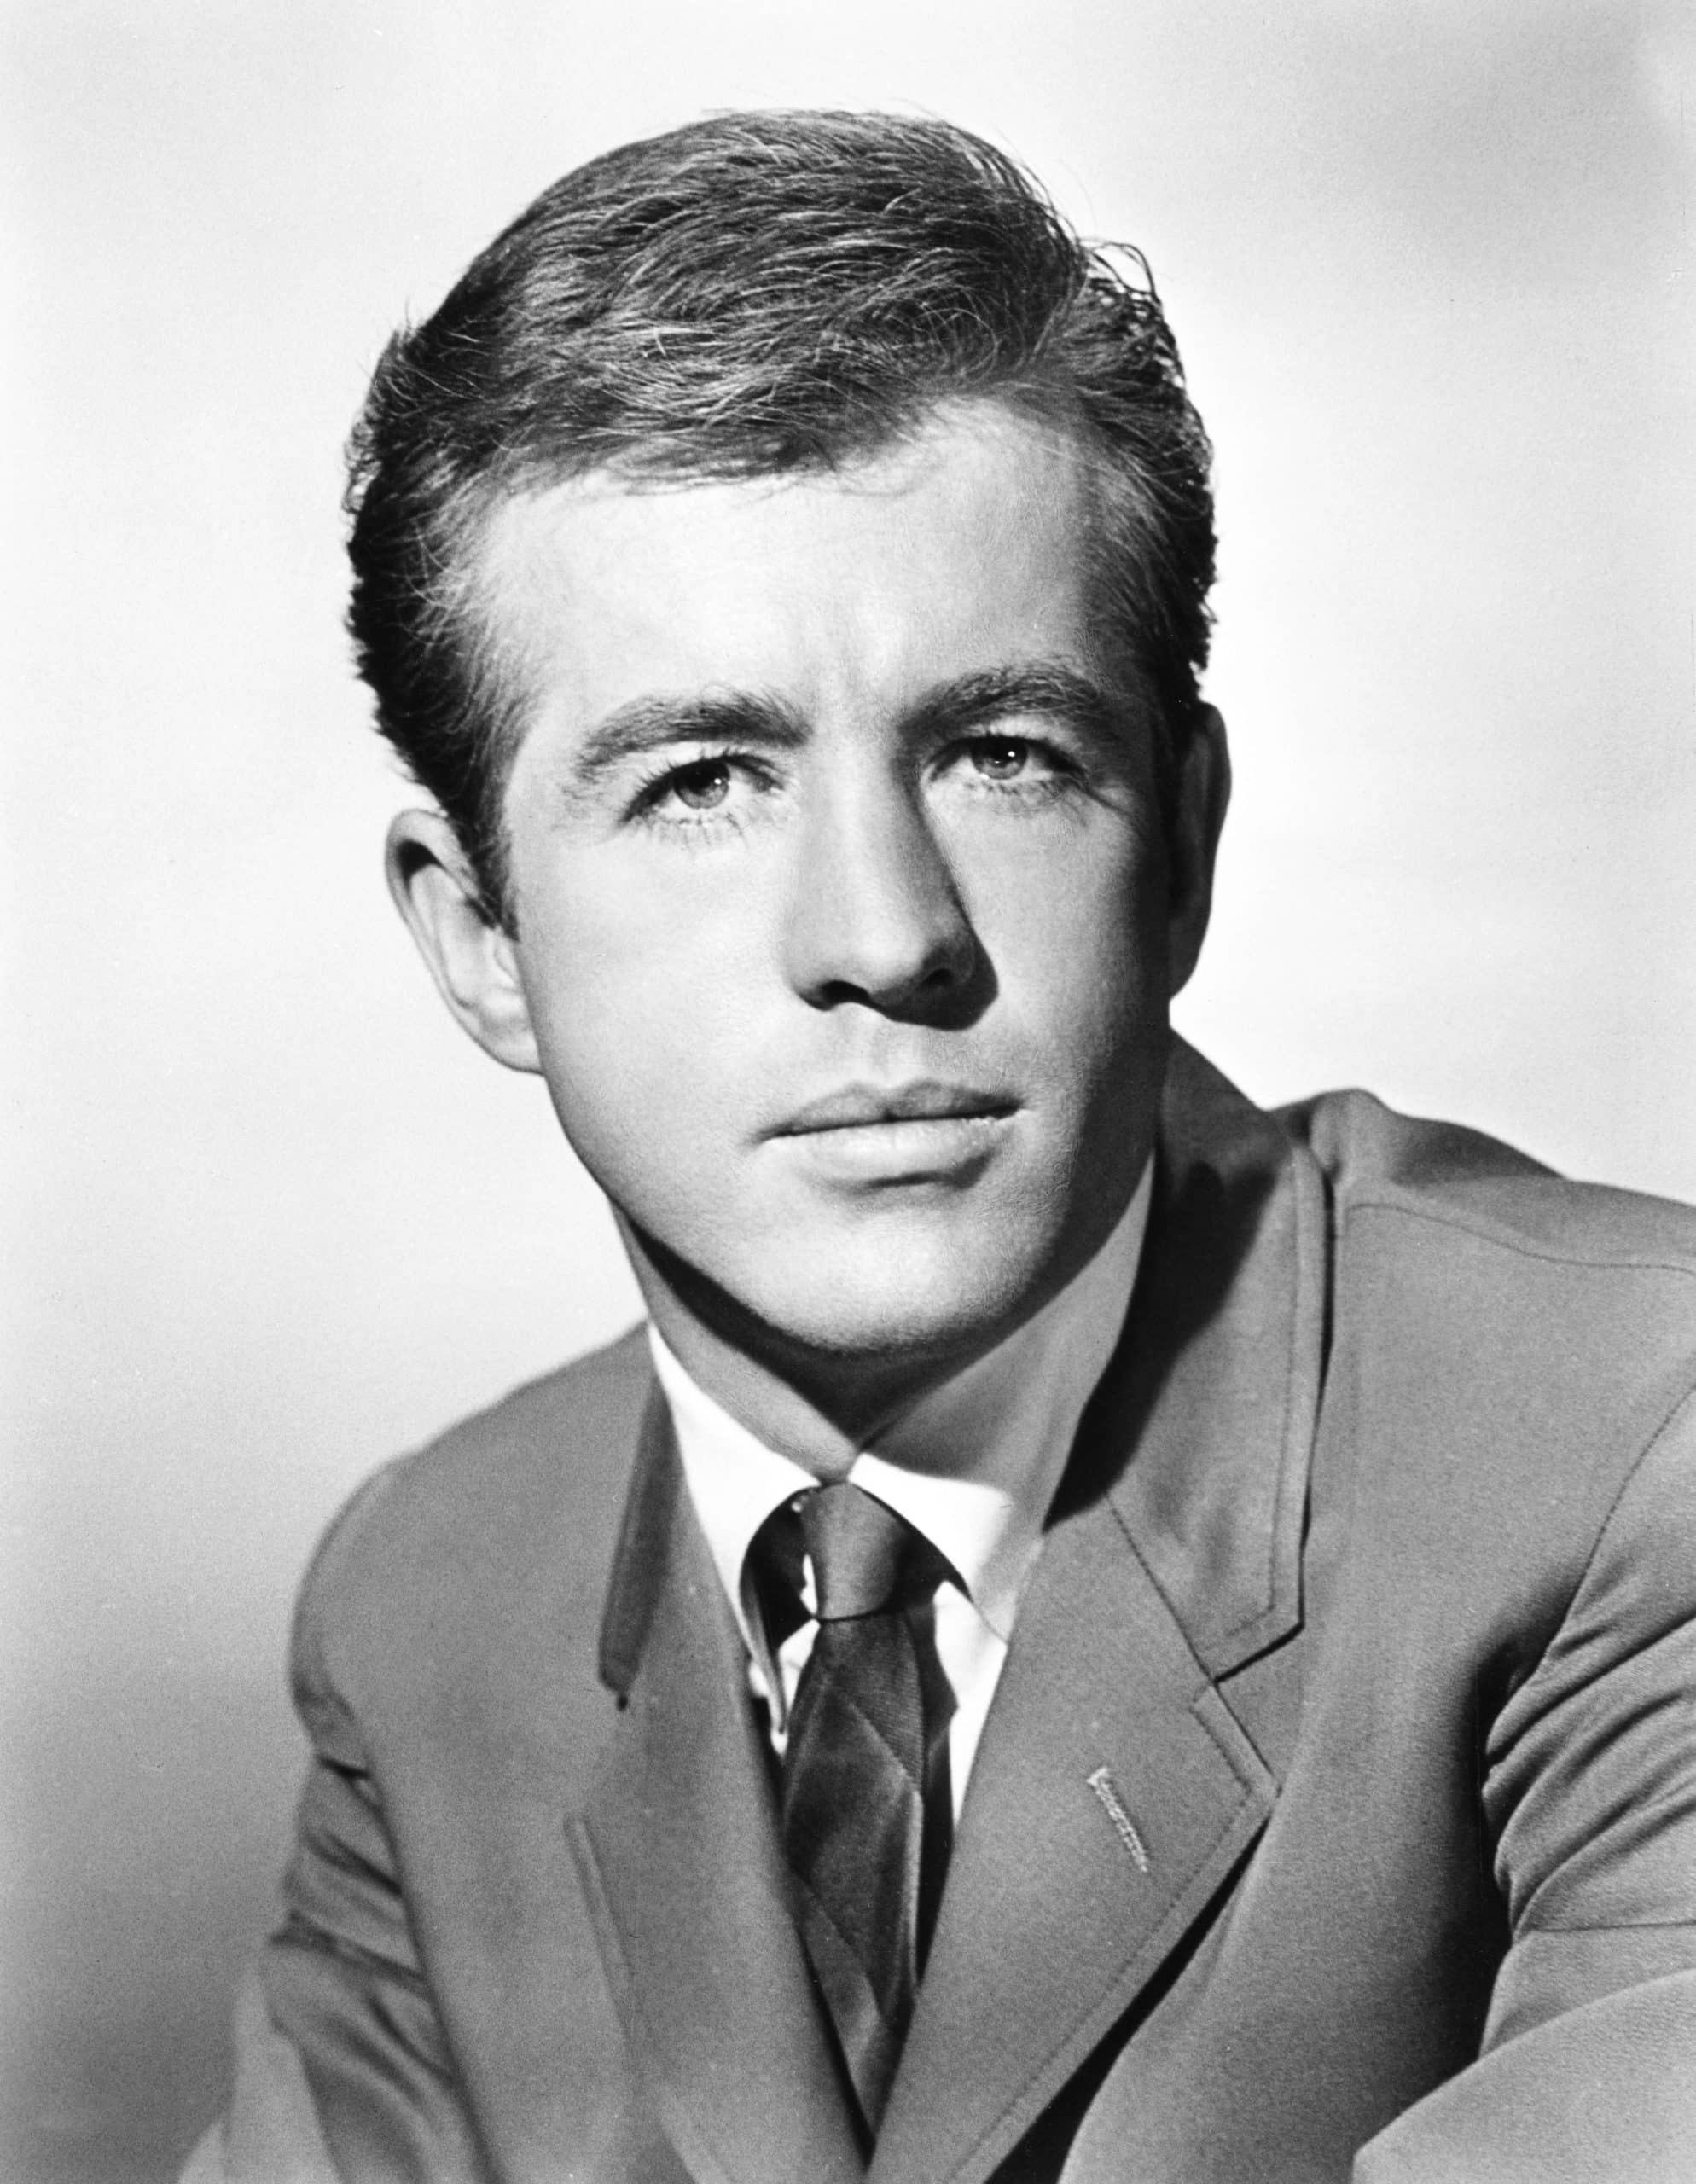 THE KILLERS, Clu Gulager, 1964 